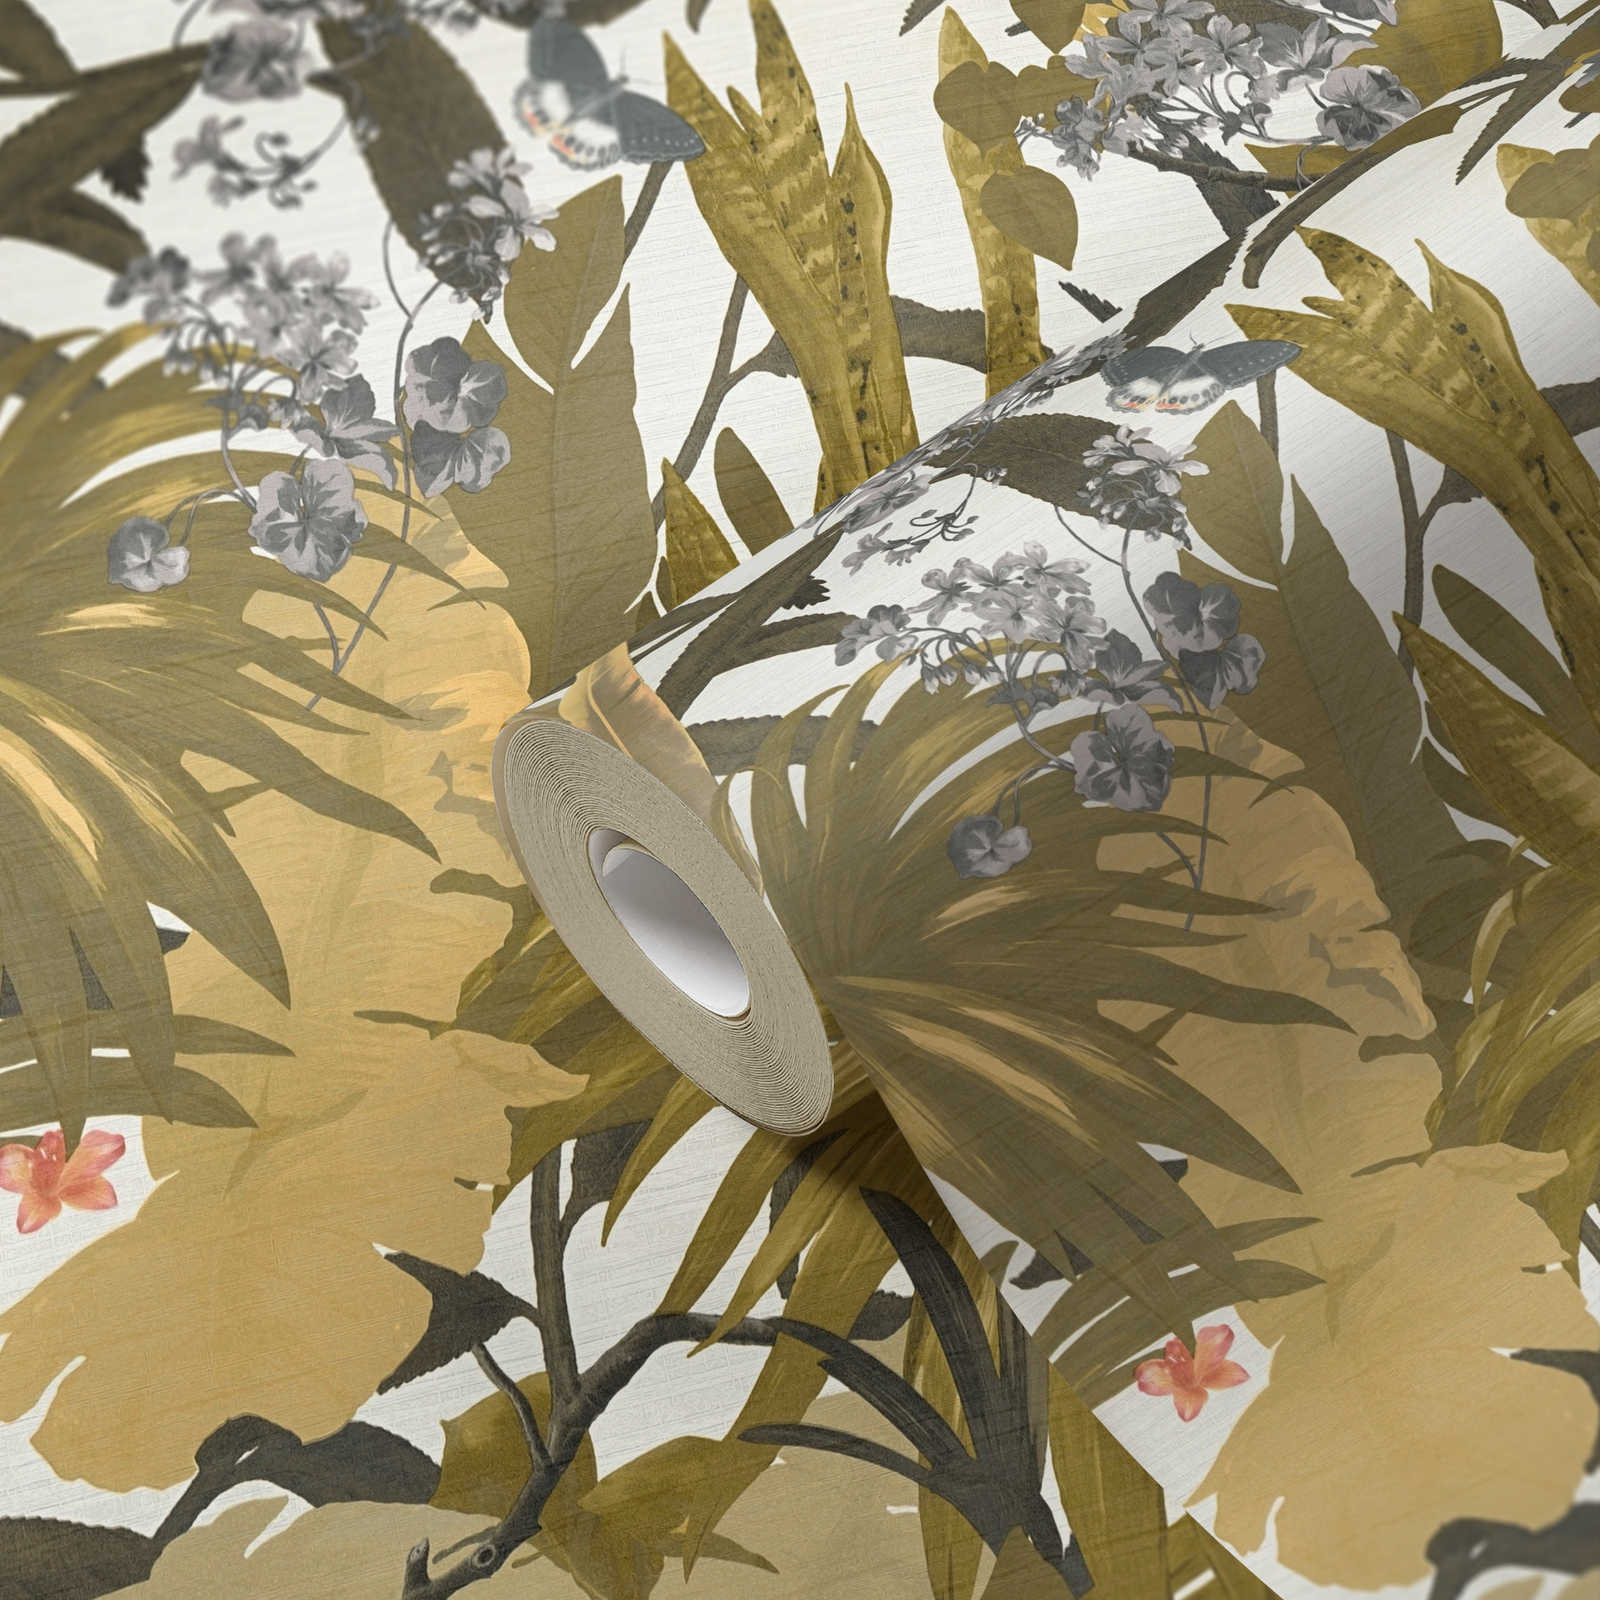             Wallpaper jungle design with leaf pattern - yellow, grey
        